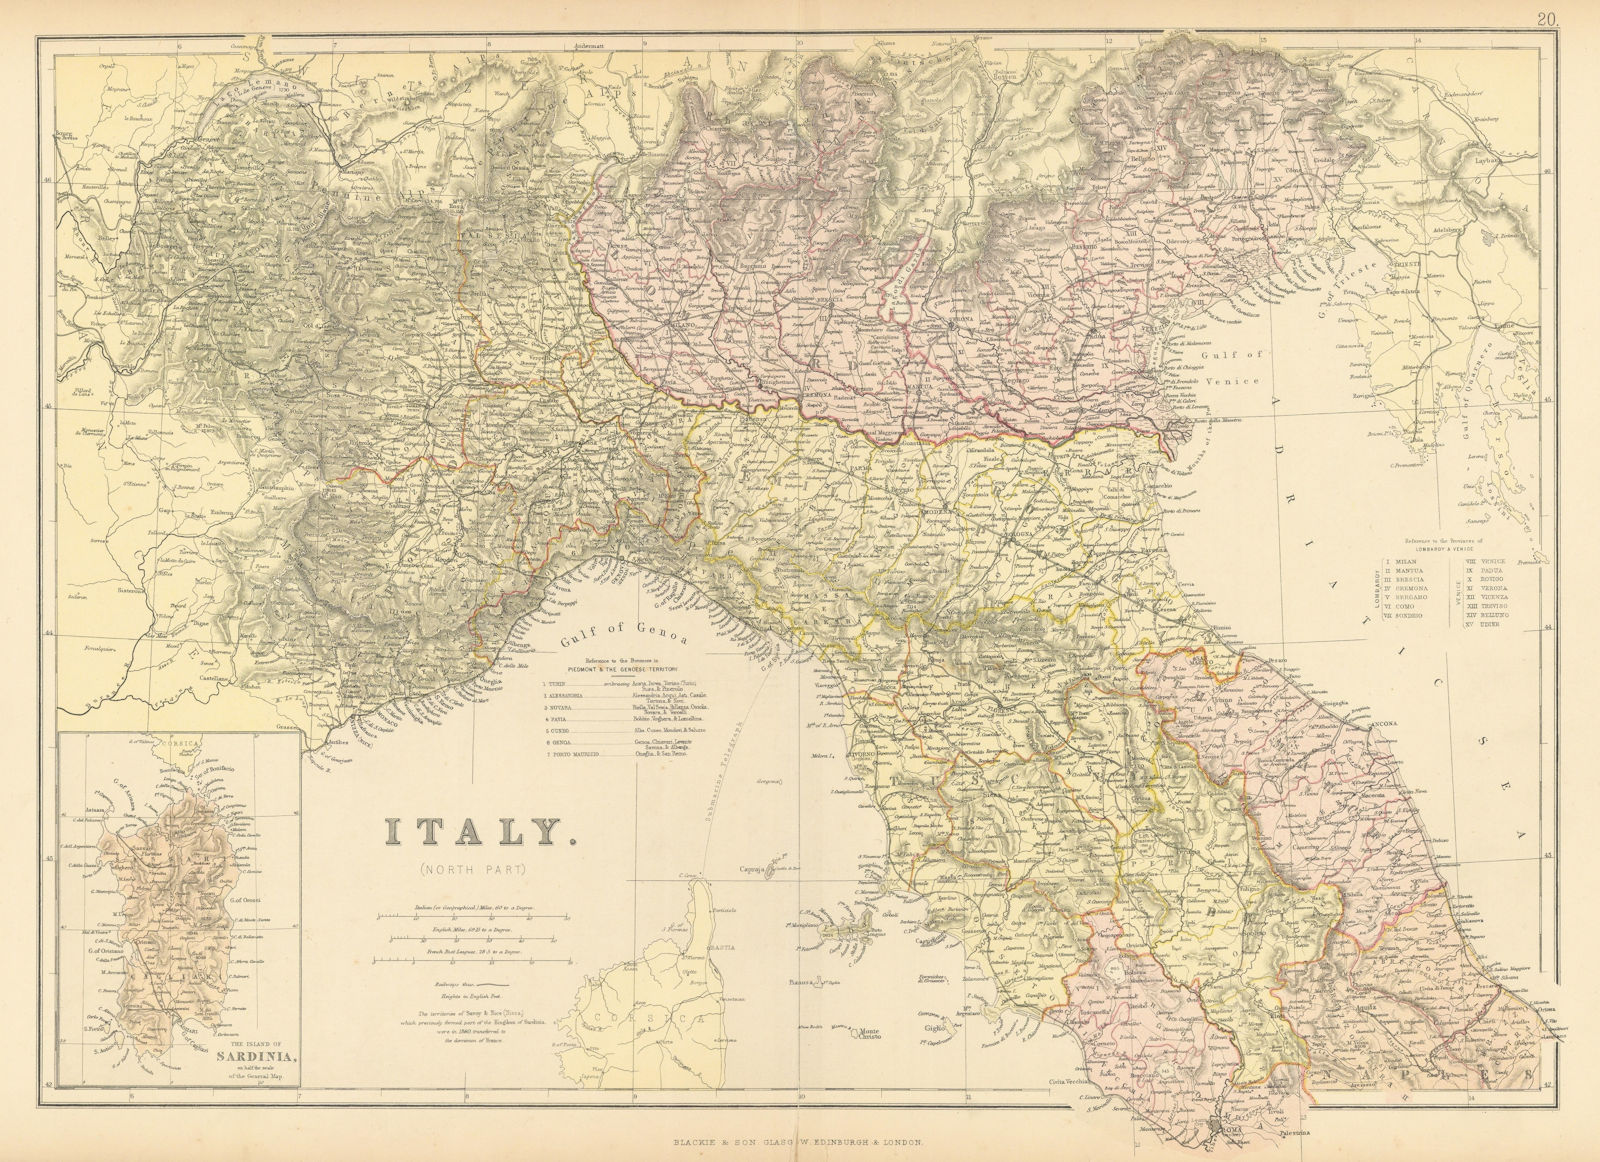 ITALY NORTH. Showing provinces & railways. BLACKIE 1886 old antique map chart